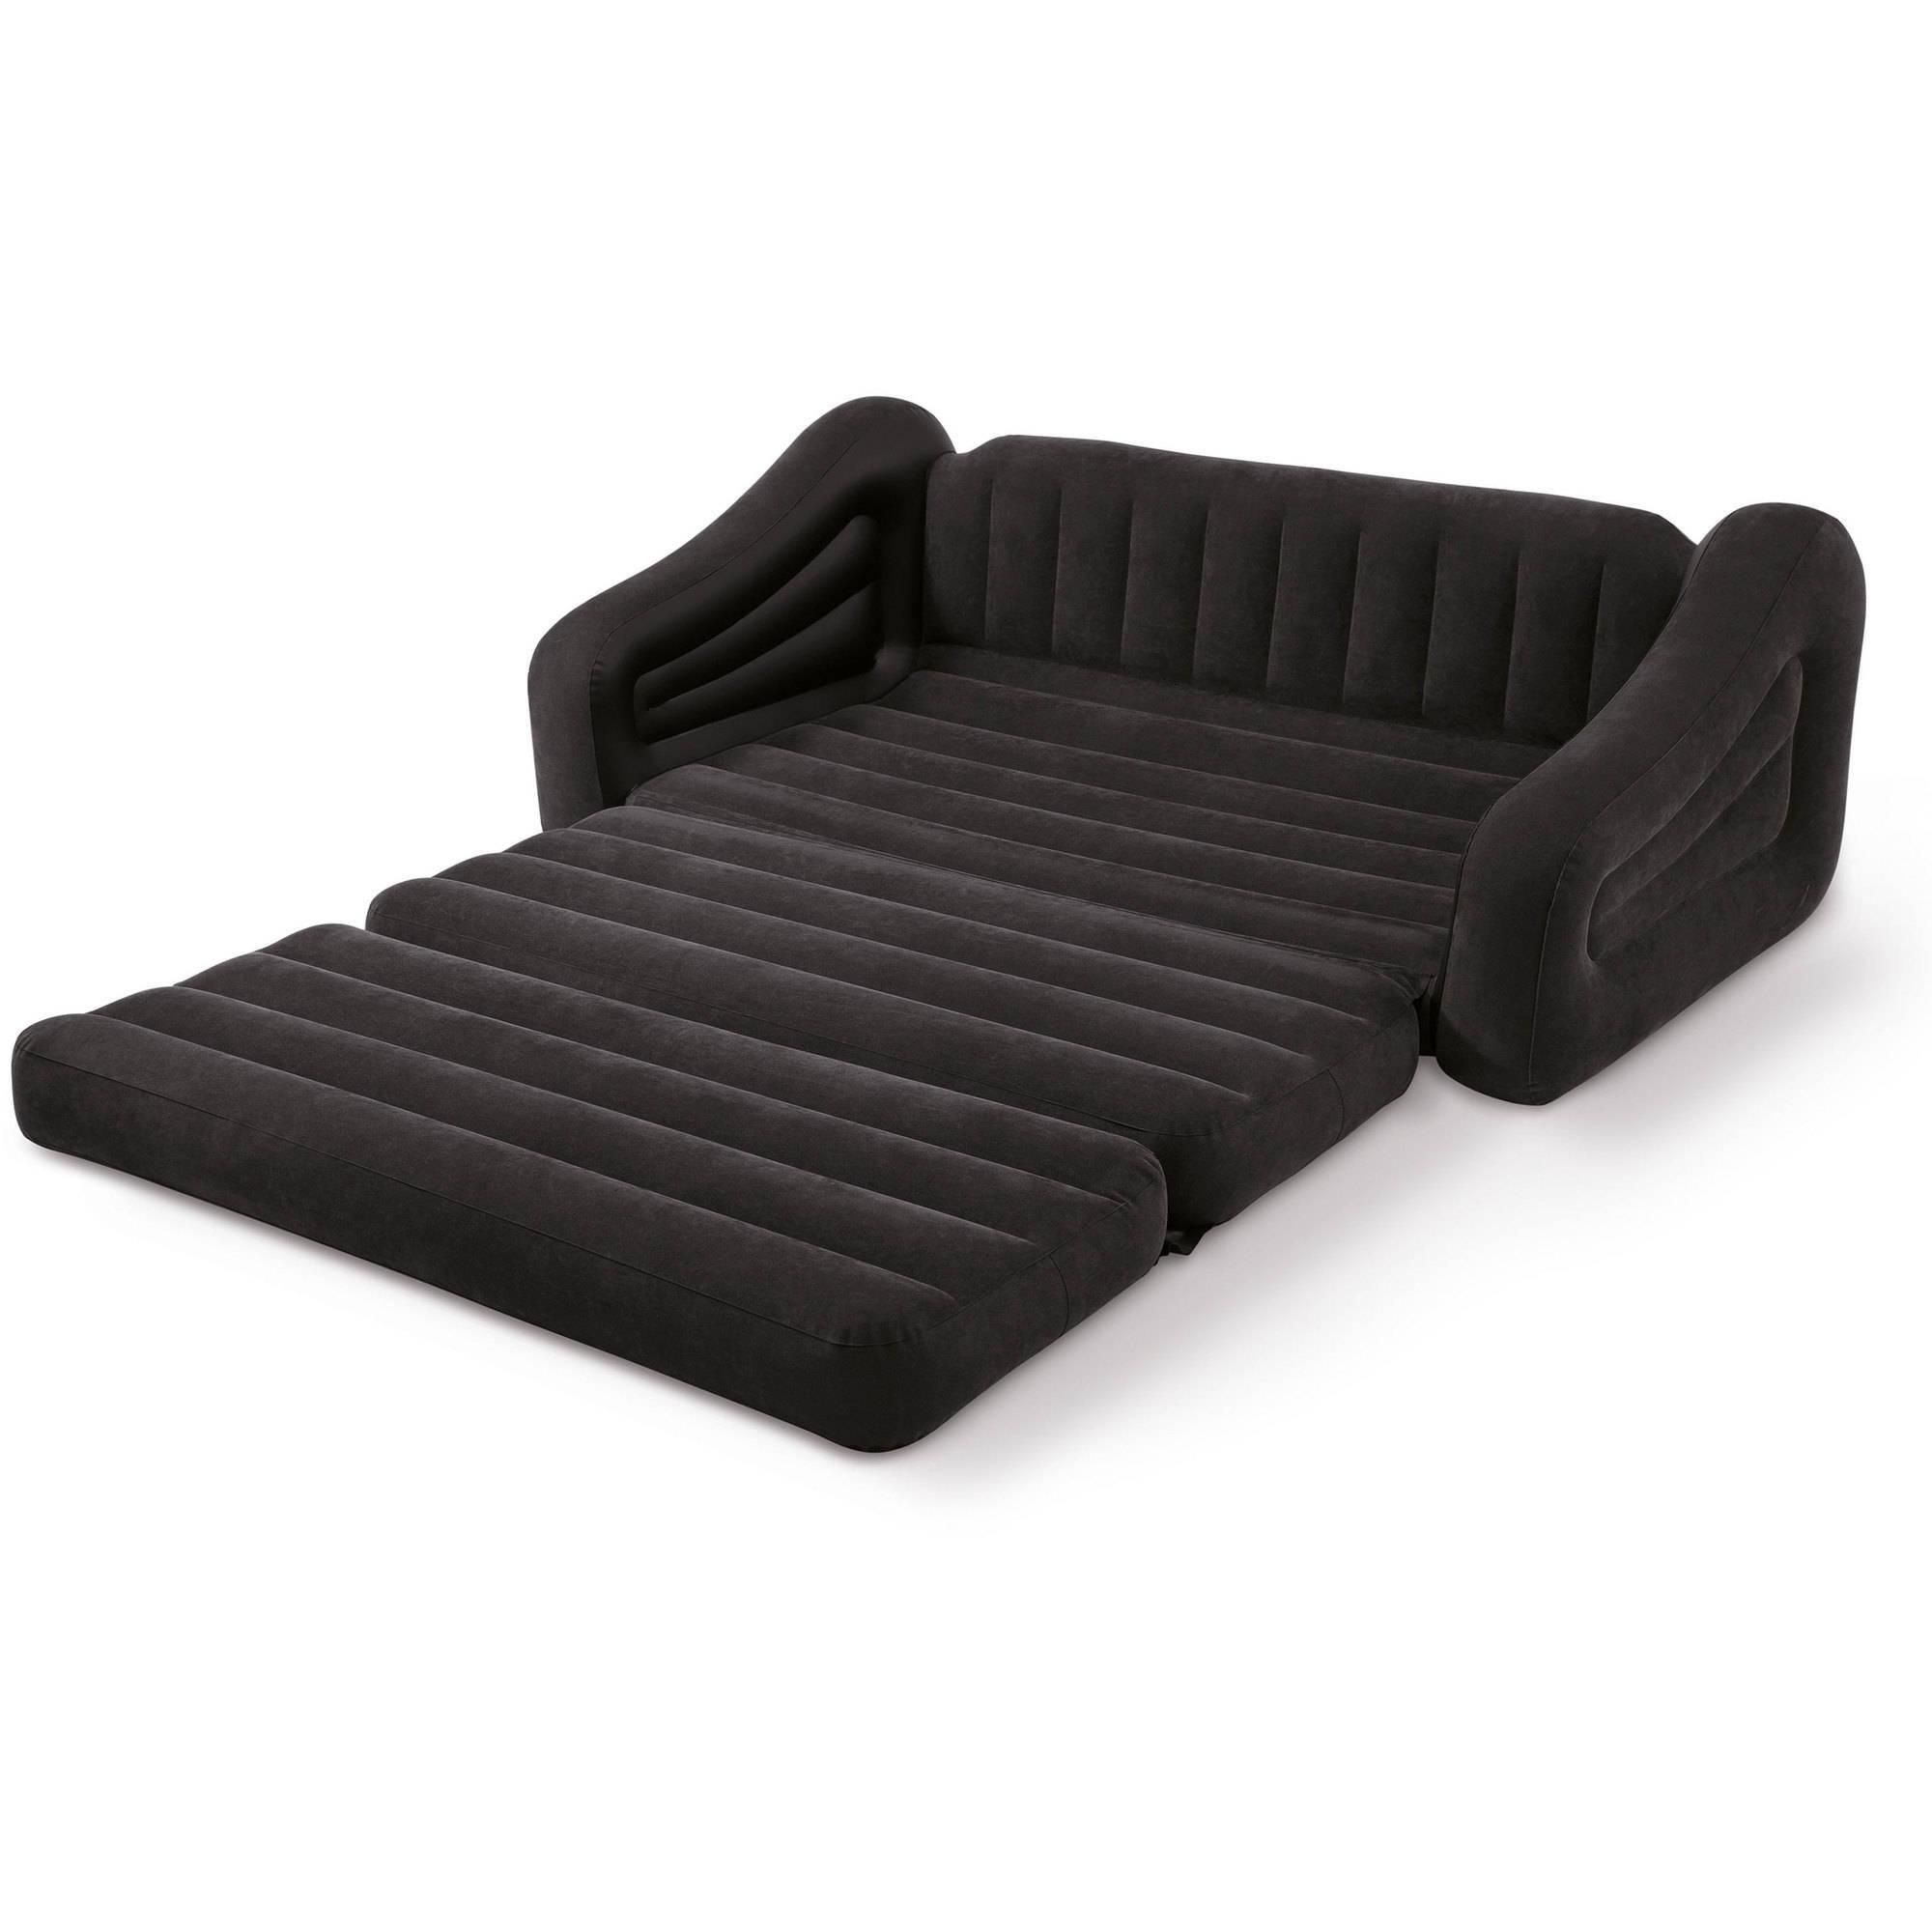 Intex Queen Inflatable Pull Out Sofa Bed – Walmart With Regard To Intex Inflatable Sofas (View 2 of 20)